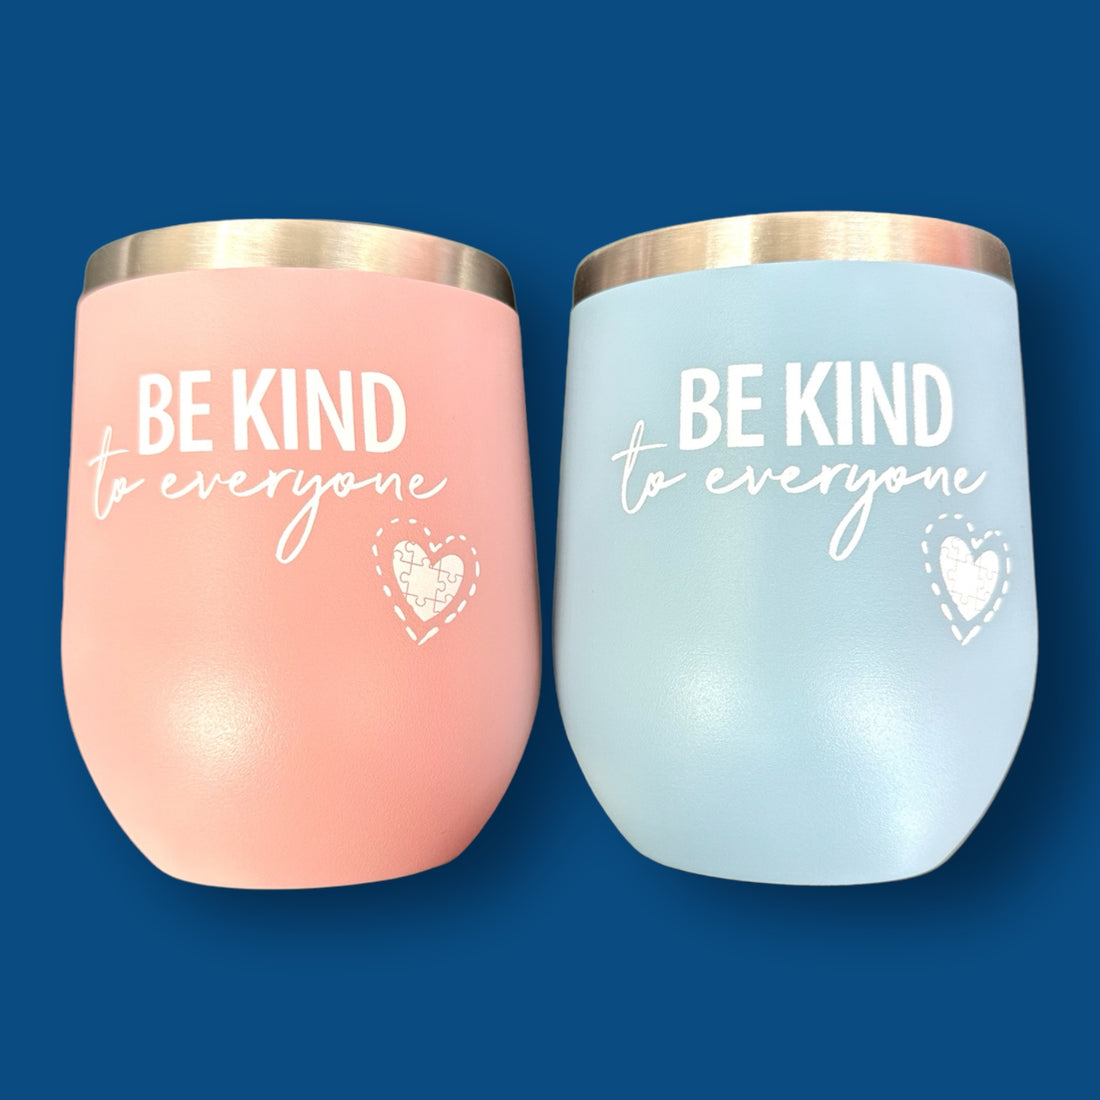 12 Oz Wine Tumbler with Decal - Be Kind to Everyone